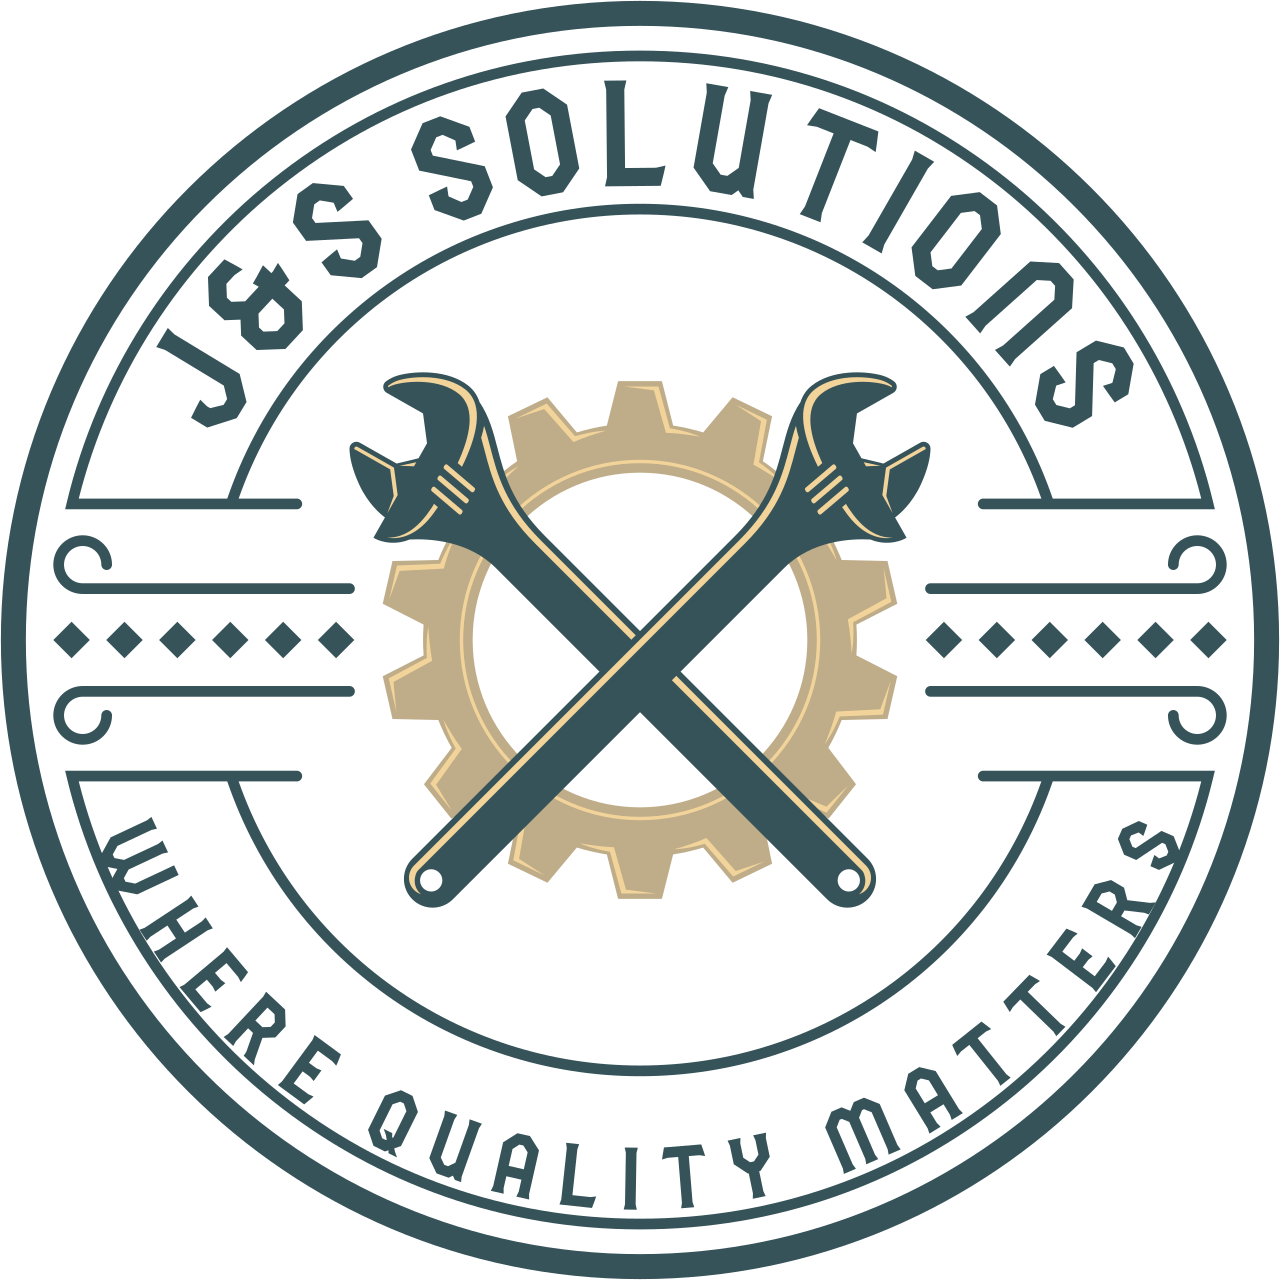 J&S SOLUTIONS's web page